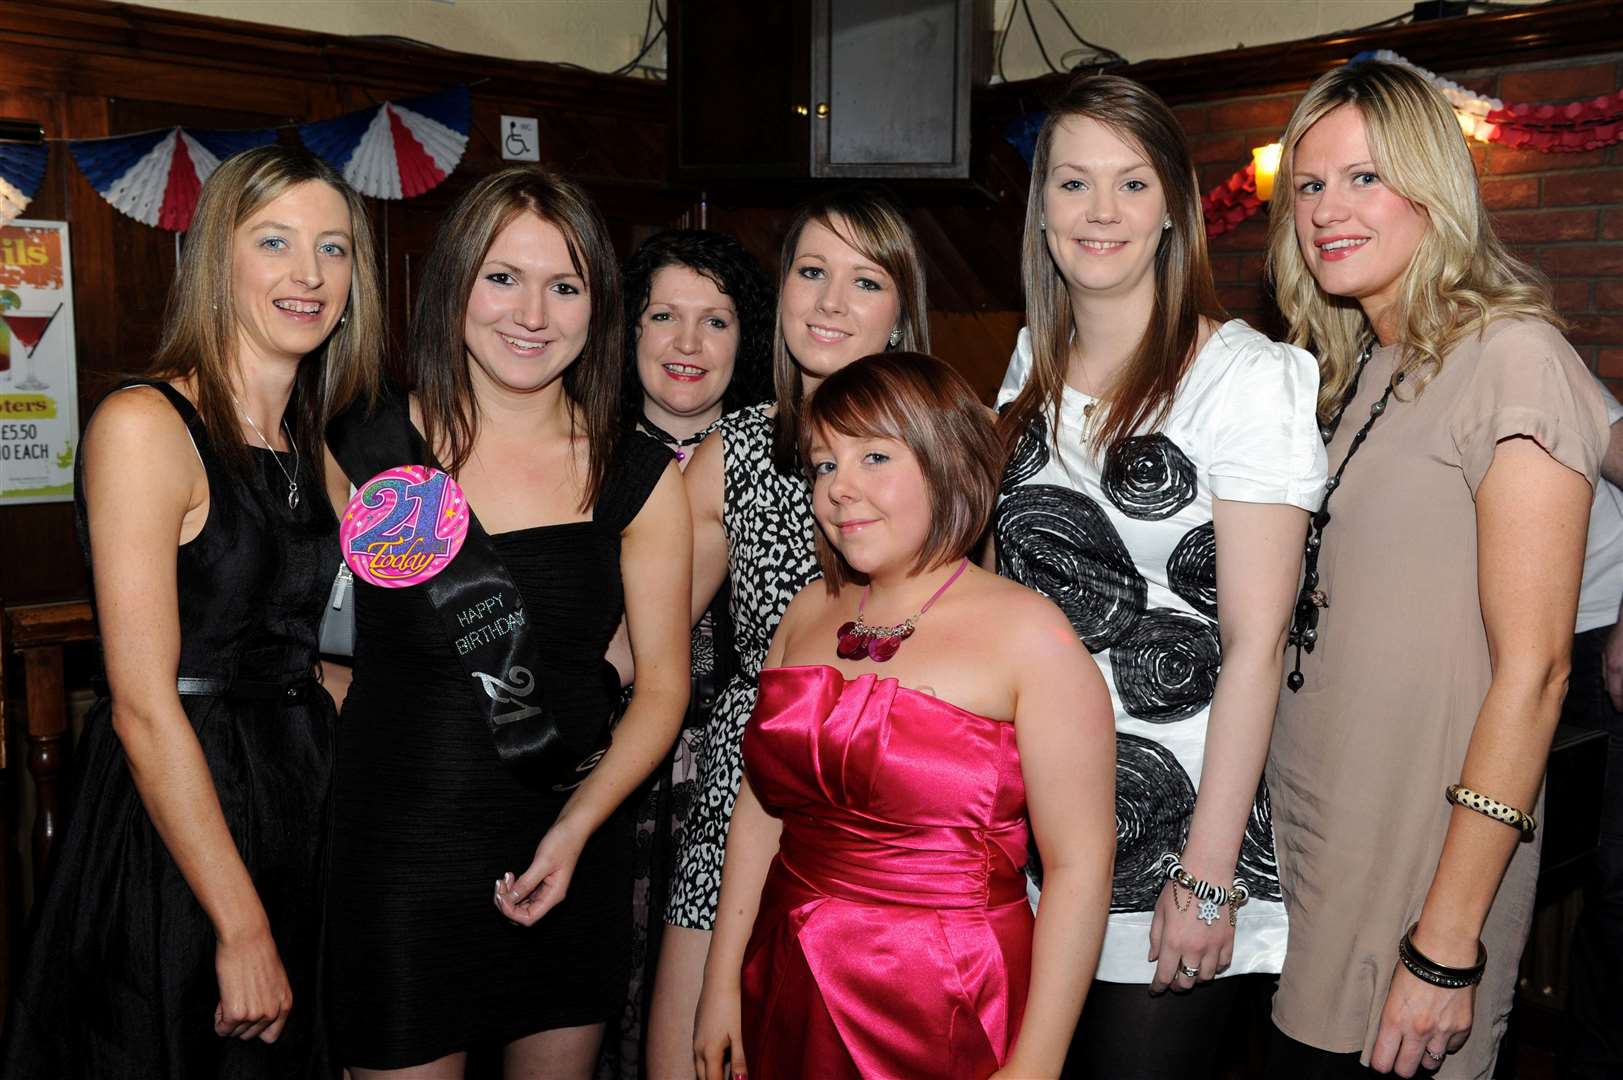 (2nd left) Kayleigh Millward from North kessock celebrates her 21st at Lauders.